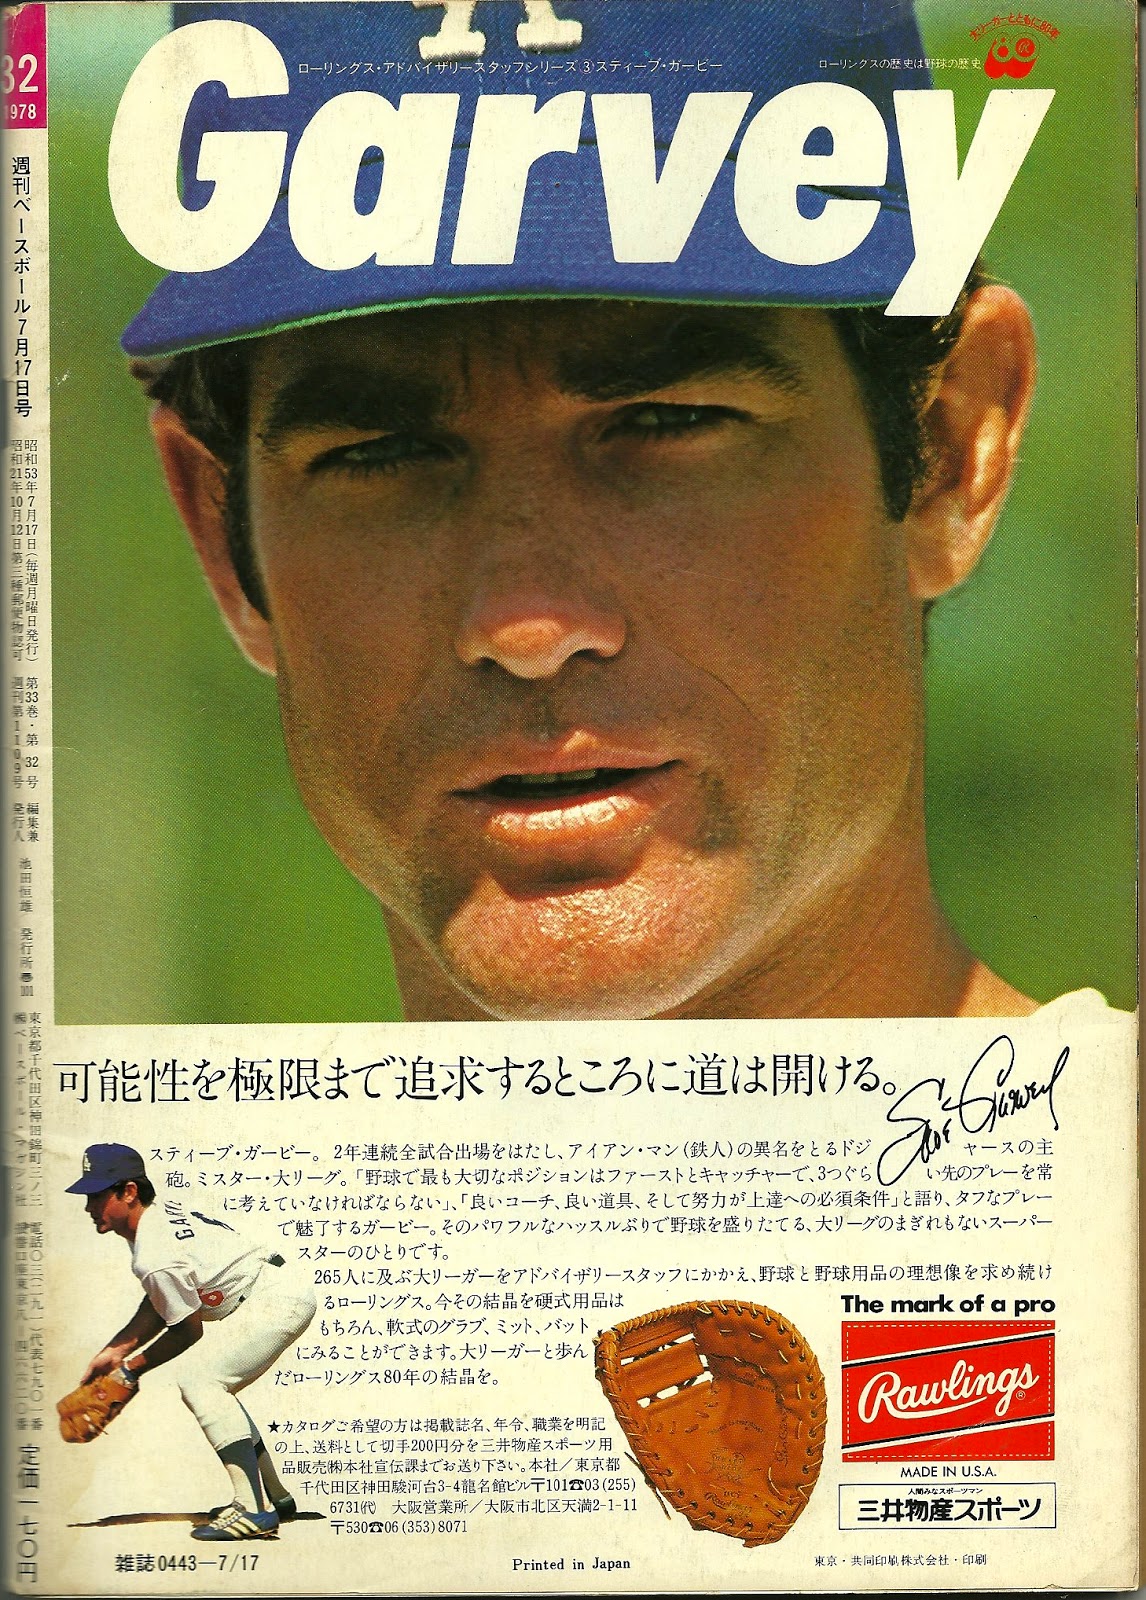 1978, The Year it all began.: New Garvey find - Japanese magazine